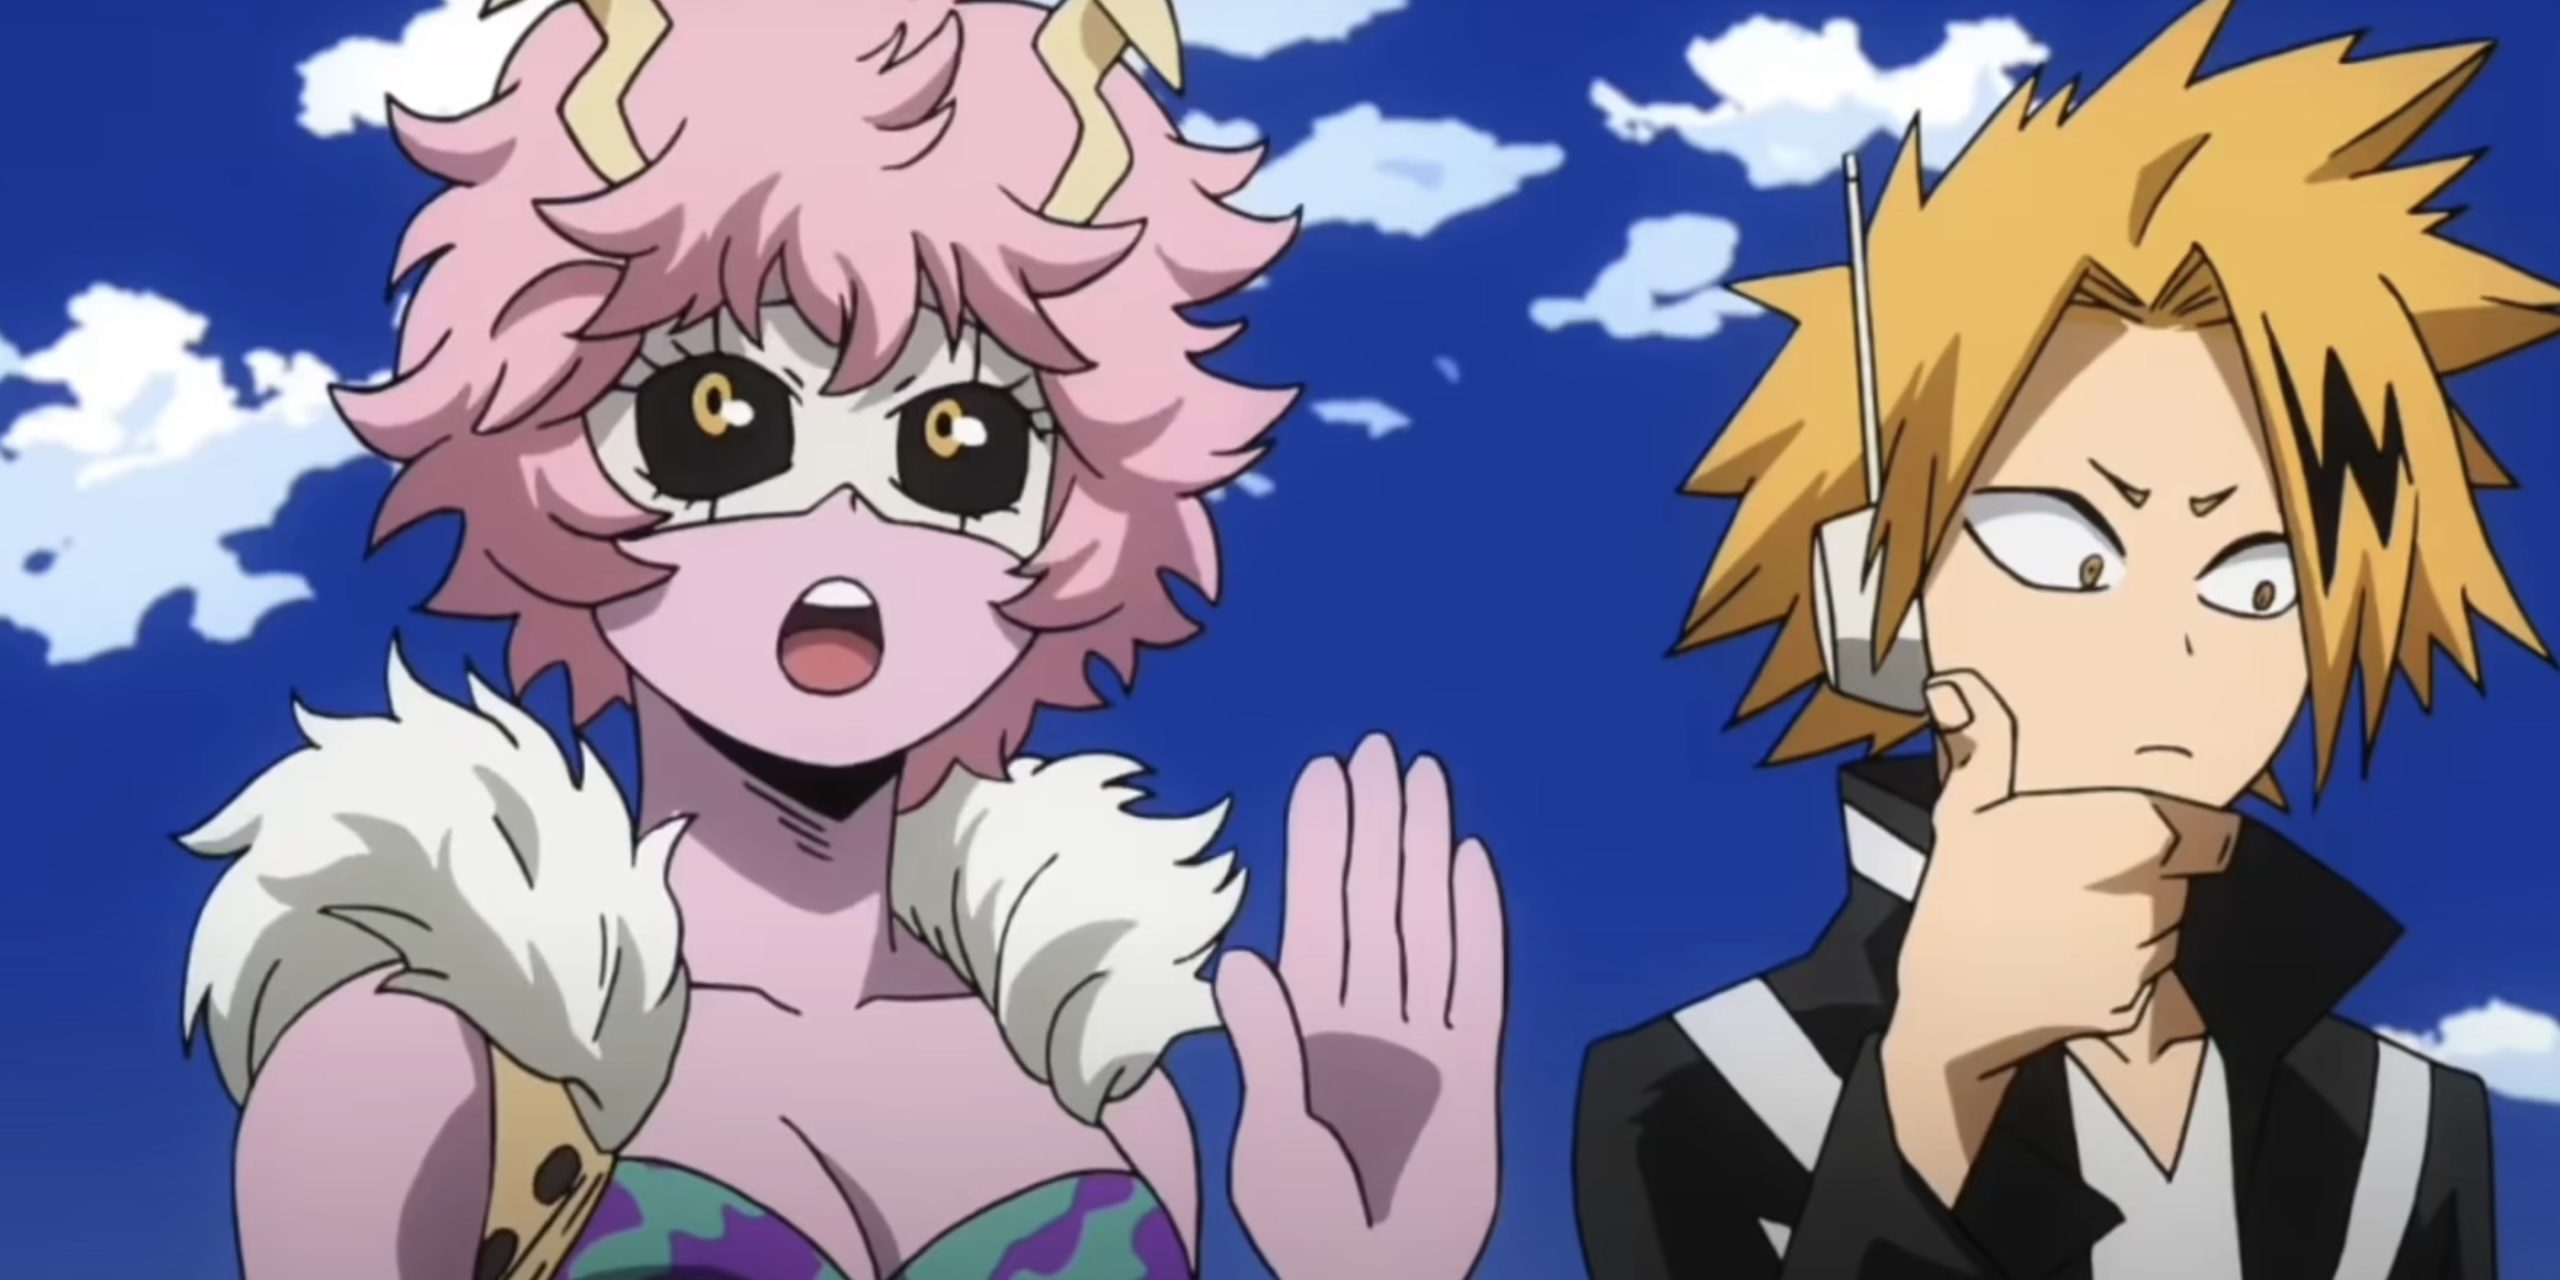 1705596722 478 The Real Reason Why Mina Ashidos Skin Is Pink In